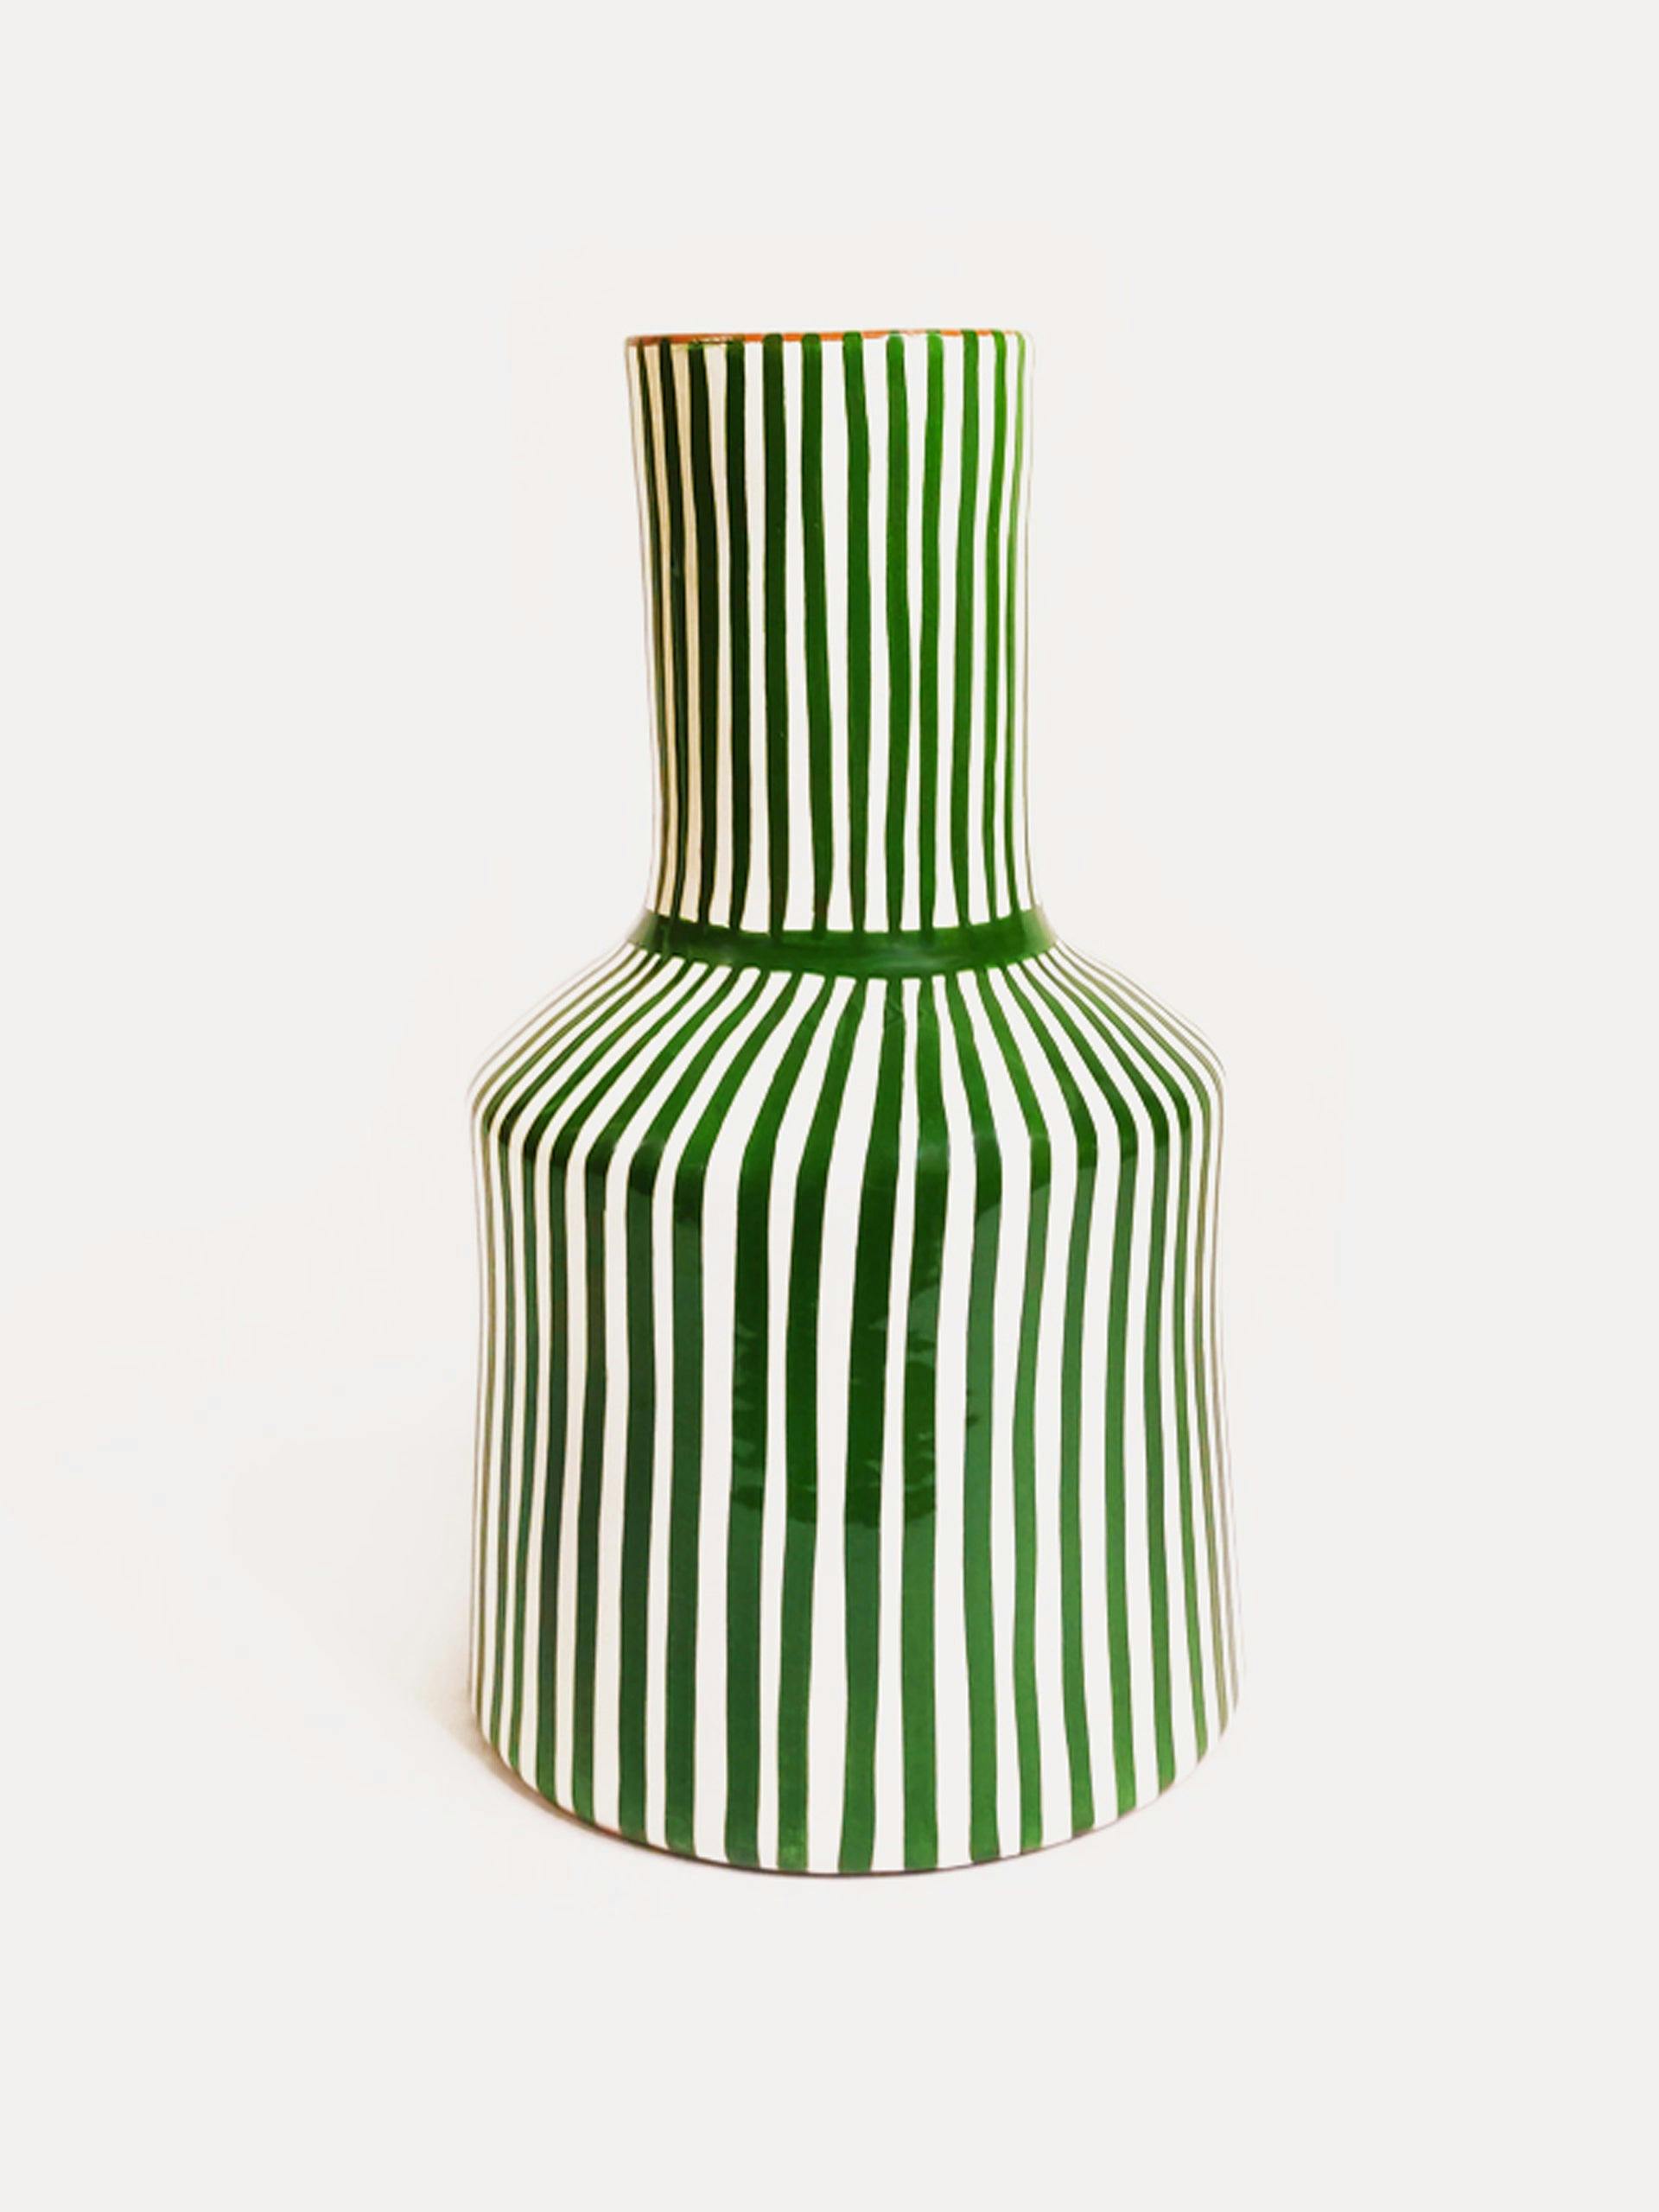 Green and white striped vase